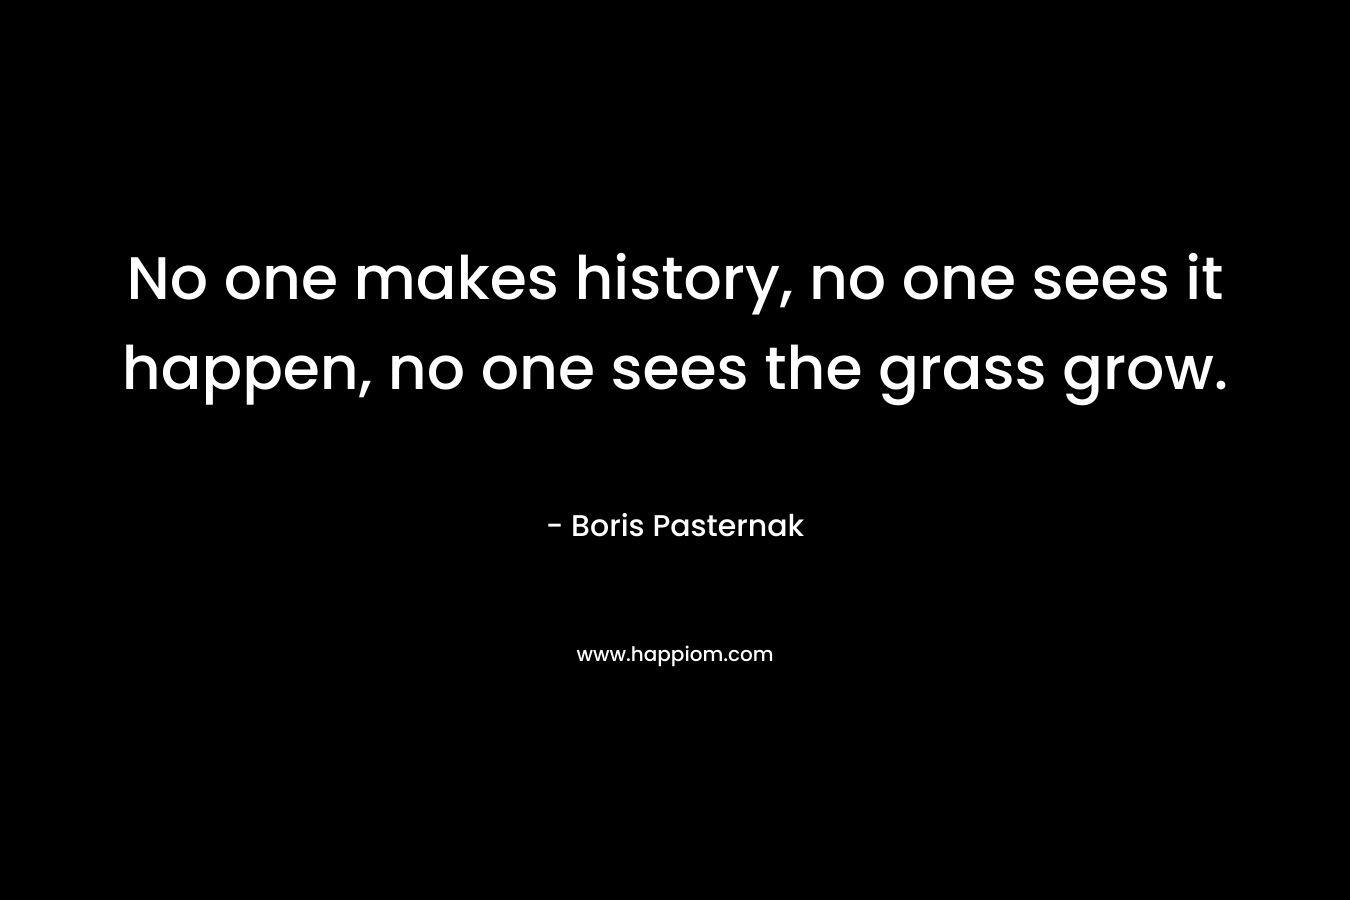 No one makes history, no one sees it happen, no one sees the grass grow.